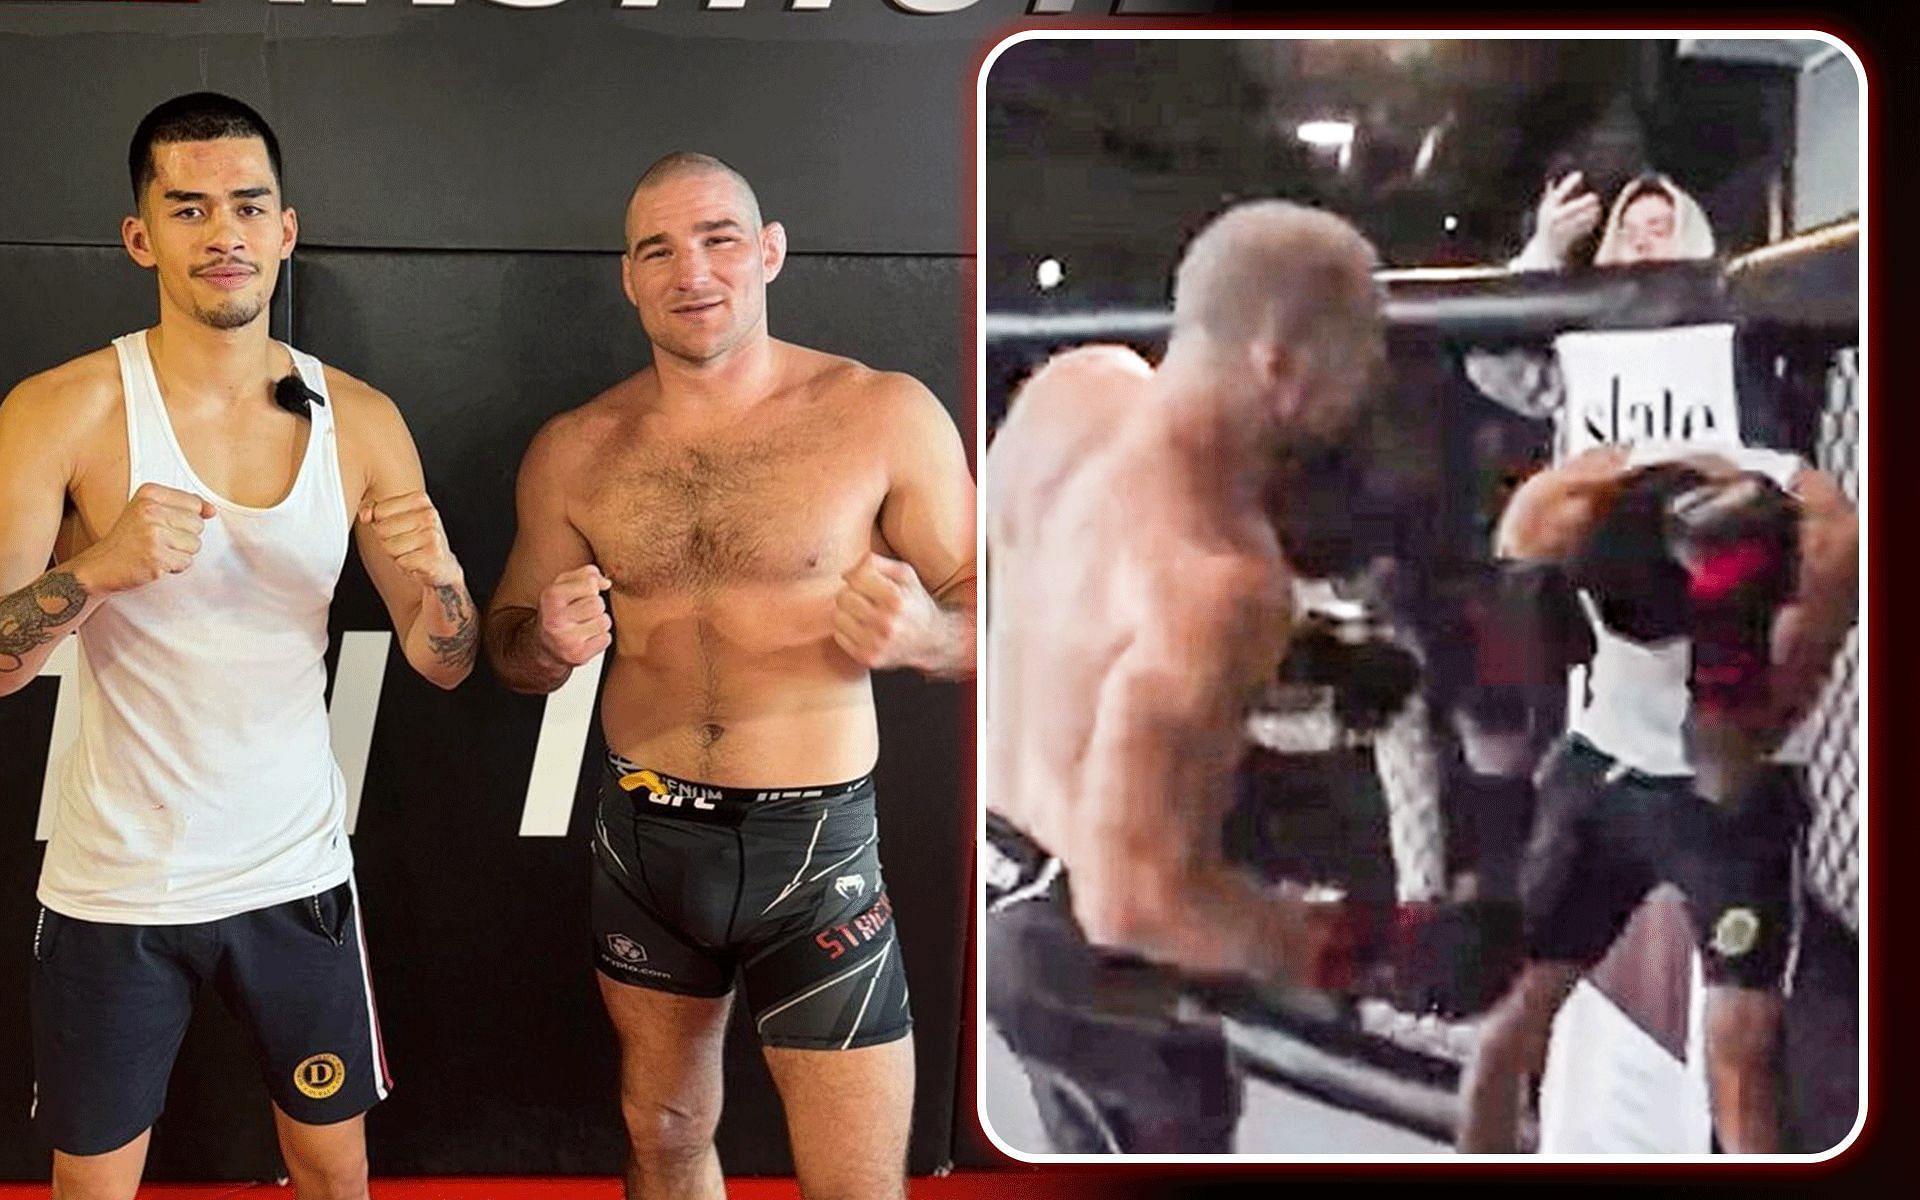 Sneako (far left) and Sean Strickland (second from left) recently engaged in a sparring session (right) [Images courtesy: left image via @sneako on Instagram and right image via Sneako on Rumble]